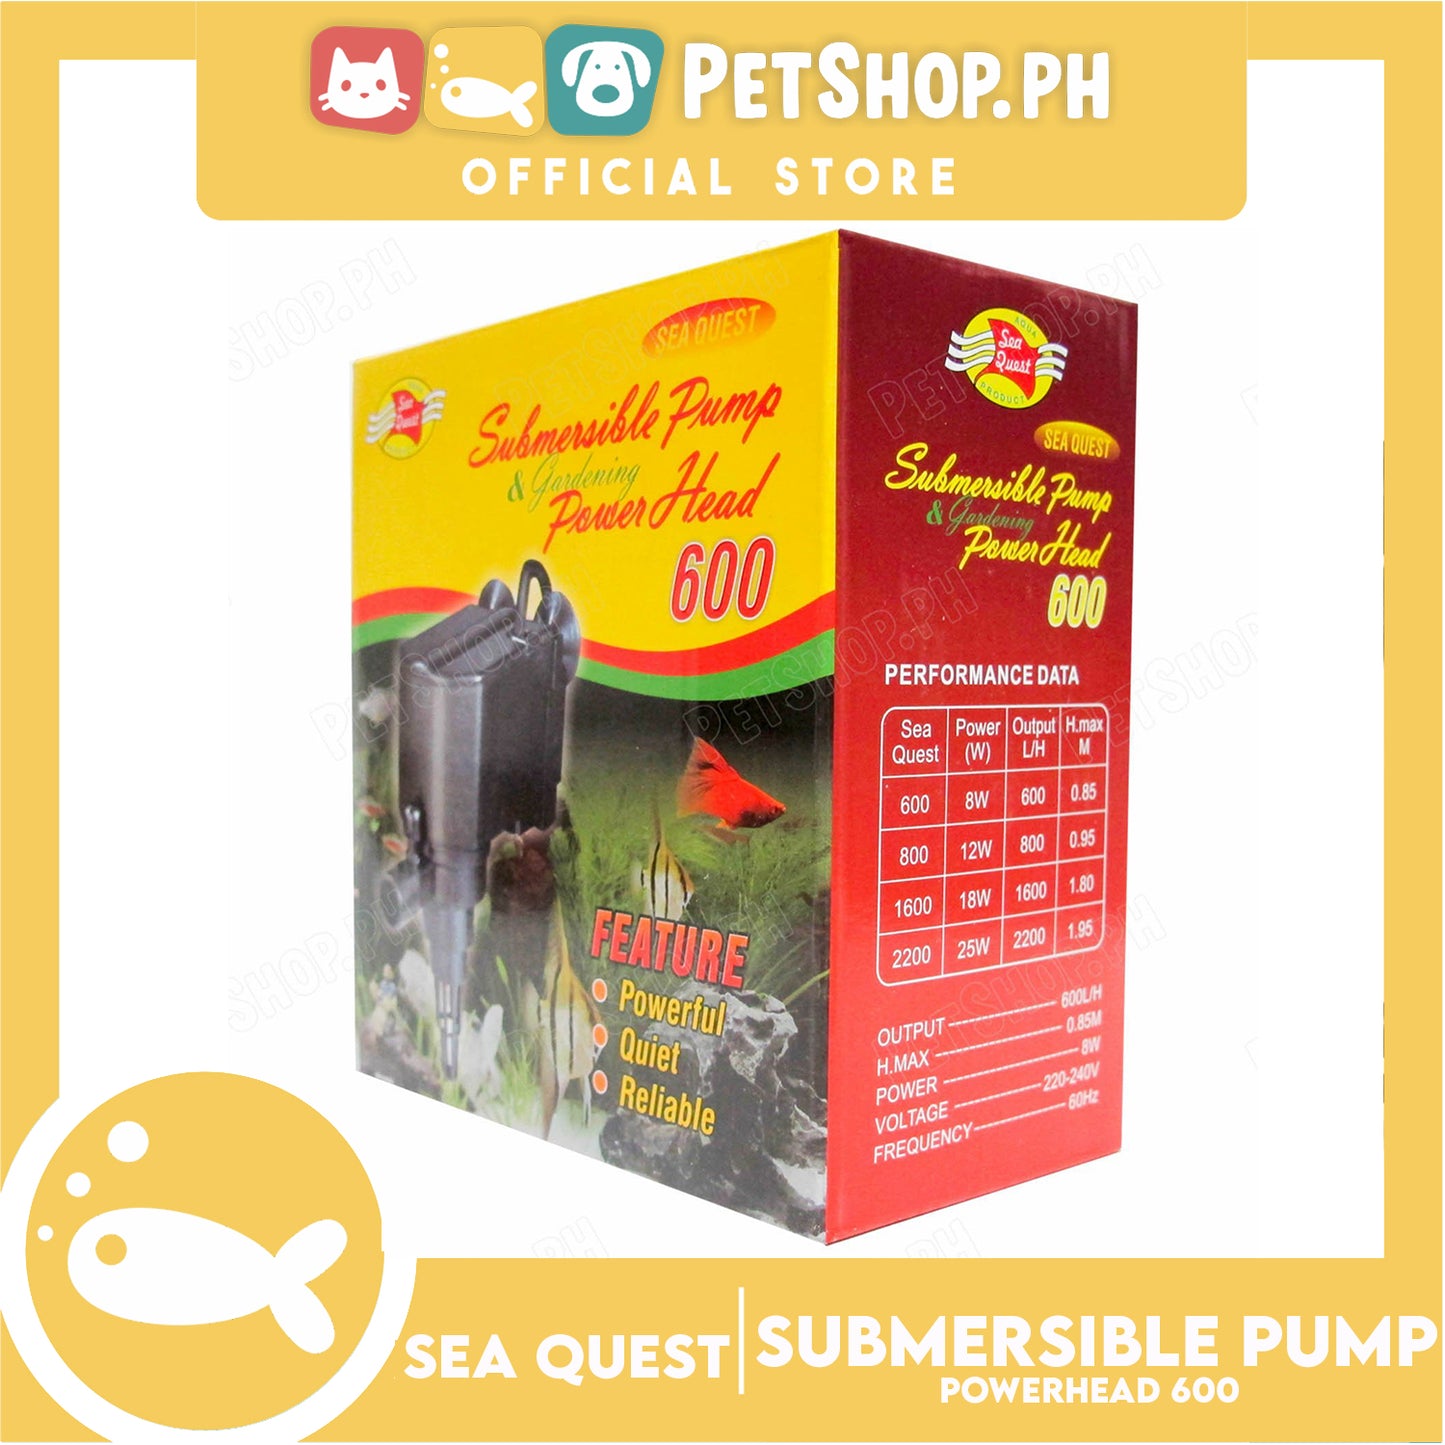 Sea Quest Submersible Pump and Gardening Powerhead 600